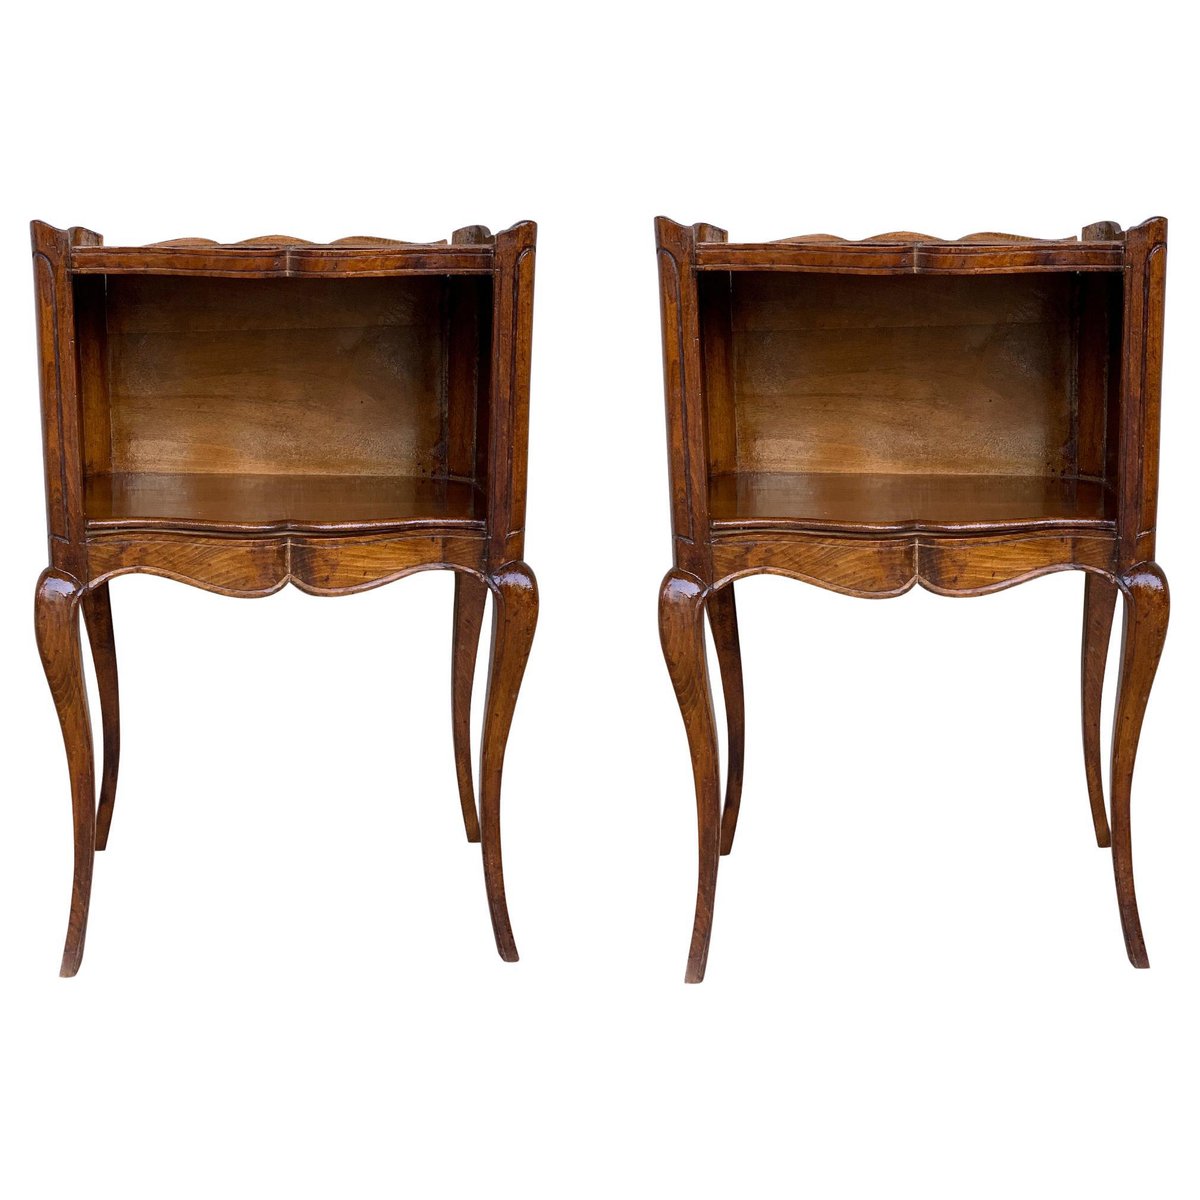 19th century french wooden bedside table with open shelf set of 2 PSK-1002486